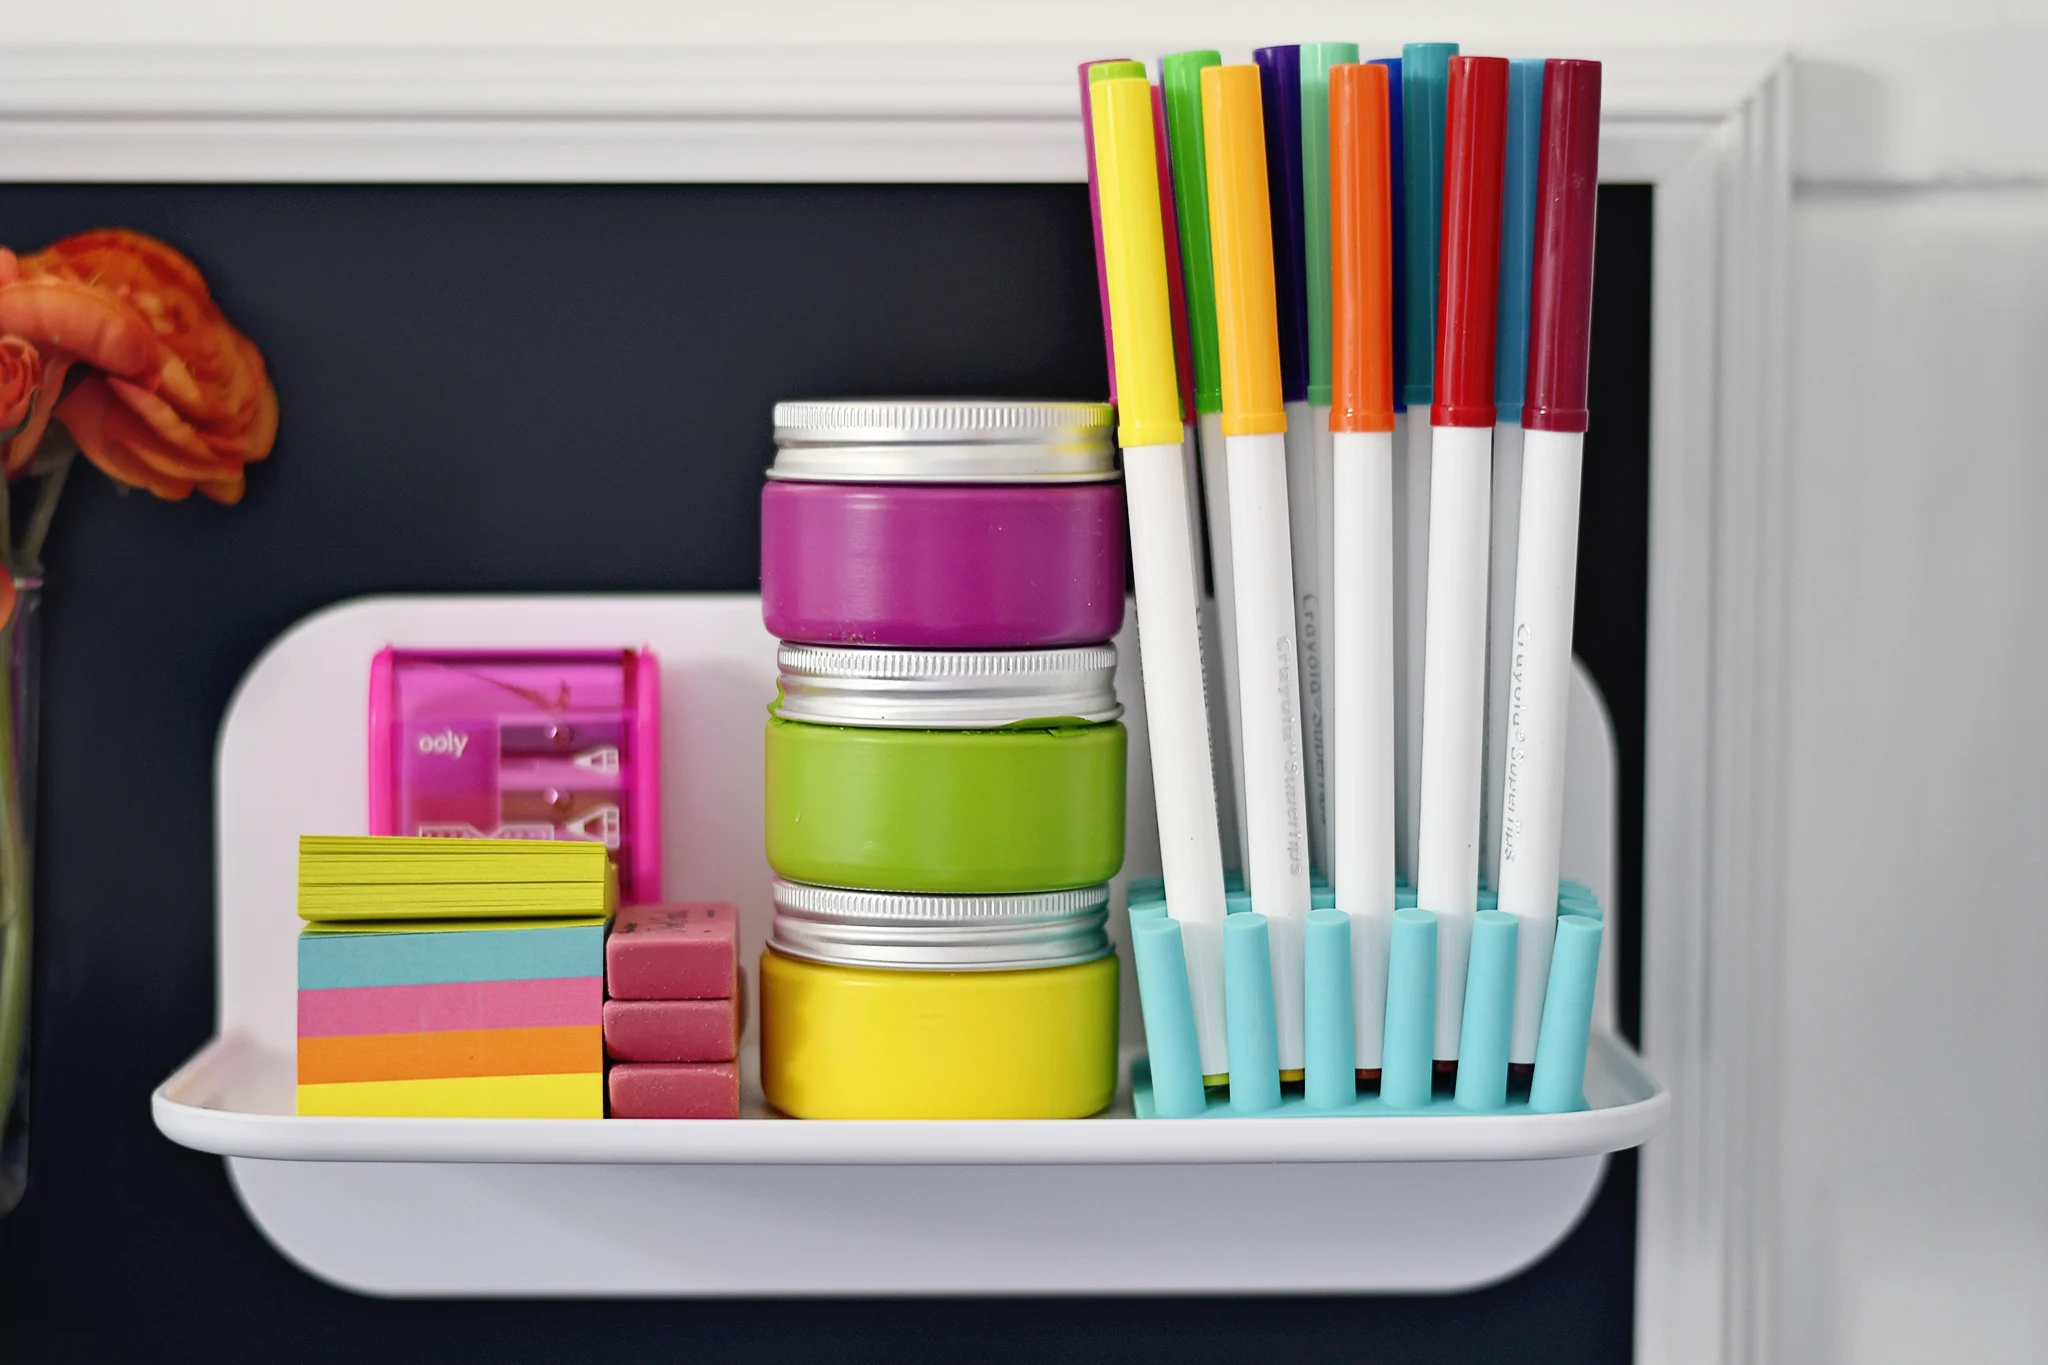 Perch "shelfy" is the perfect place to display colorful art utensils!